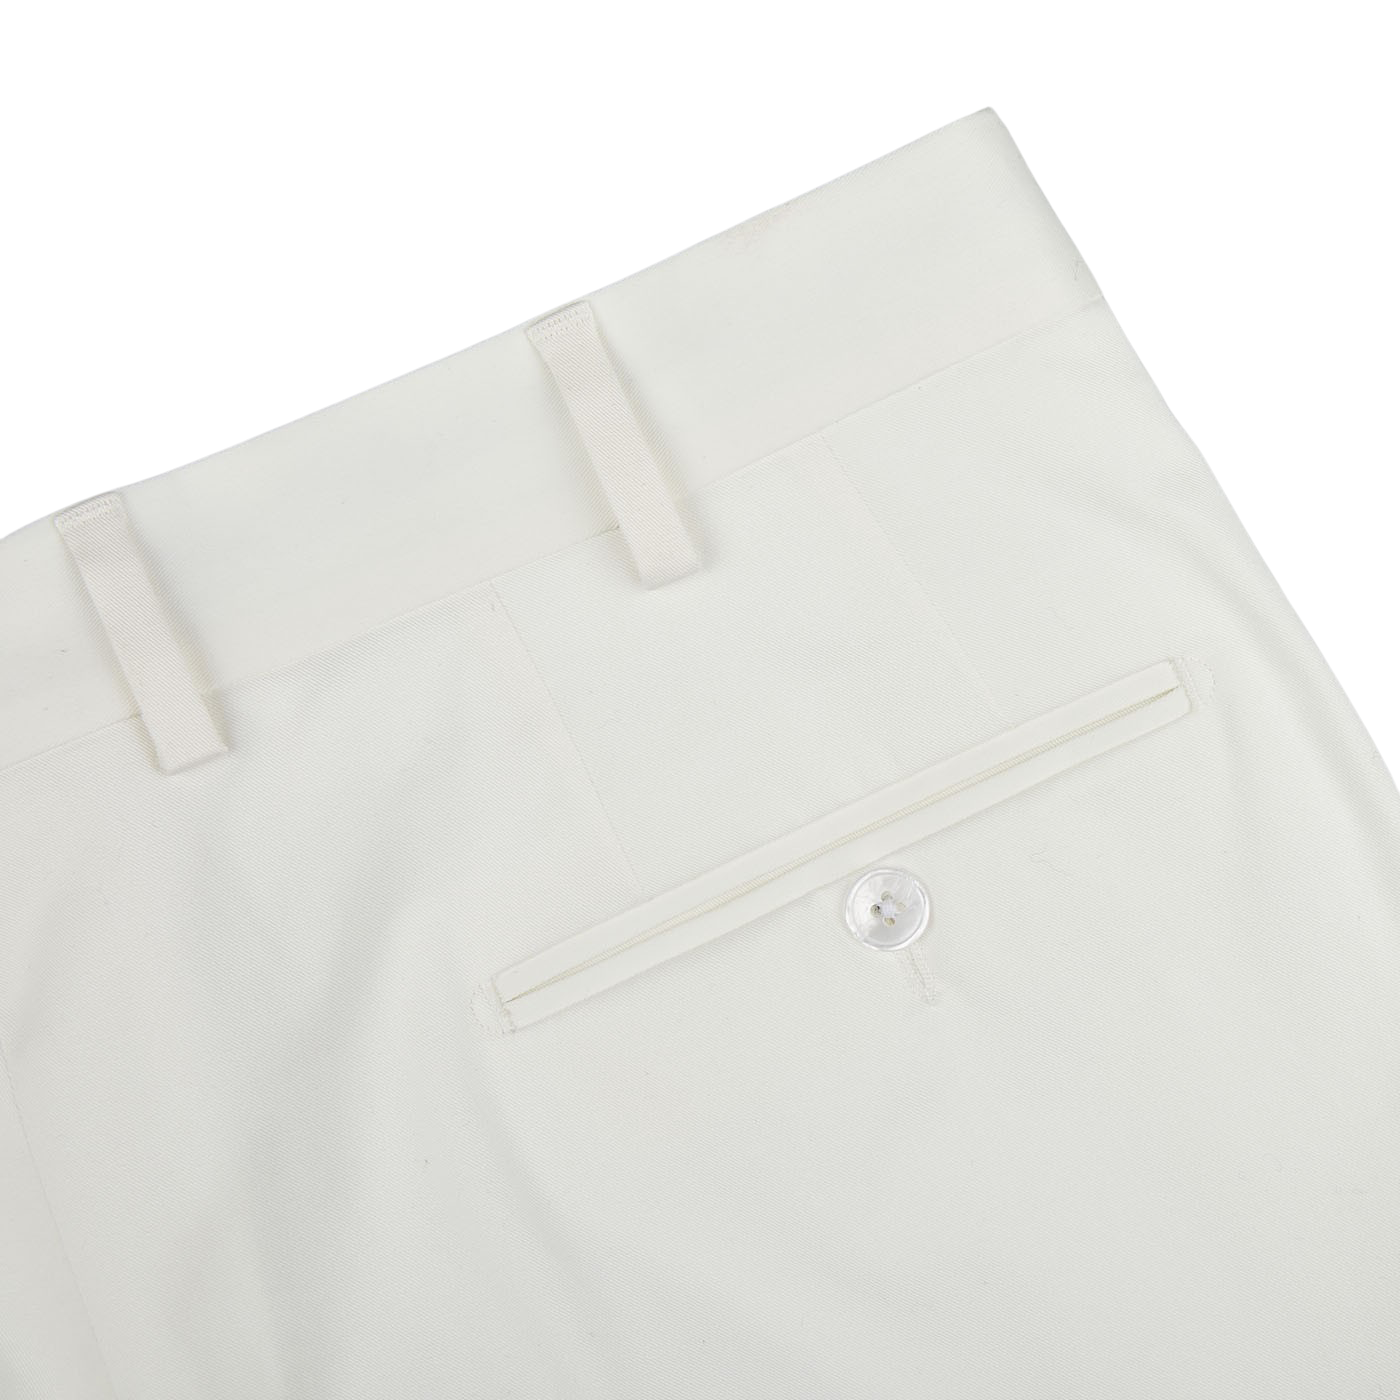 Luigi Bianchi Off-White Cotton Twill Flat Front Trousers featuring a convenient pocket on the side.